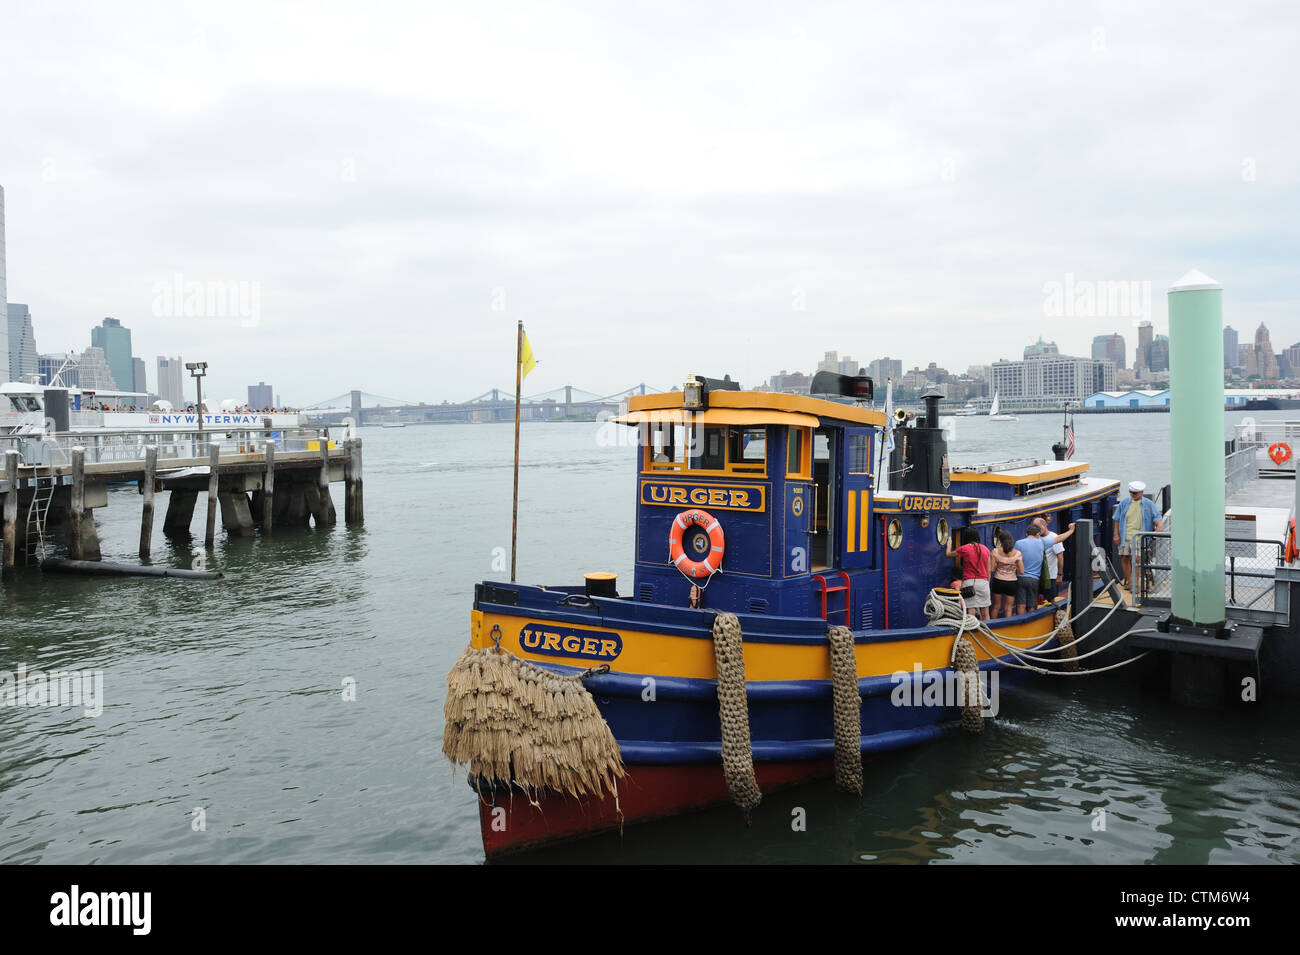 The Urger, launched in 1901 and on the National Registry of Historic Places, is the oldest operating tugboat in New York State. Stock Photo